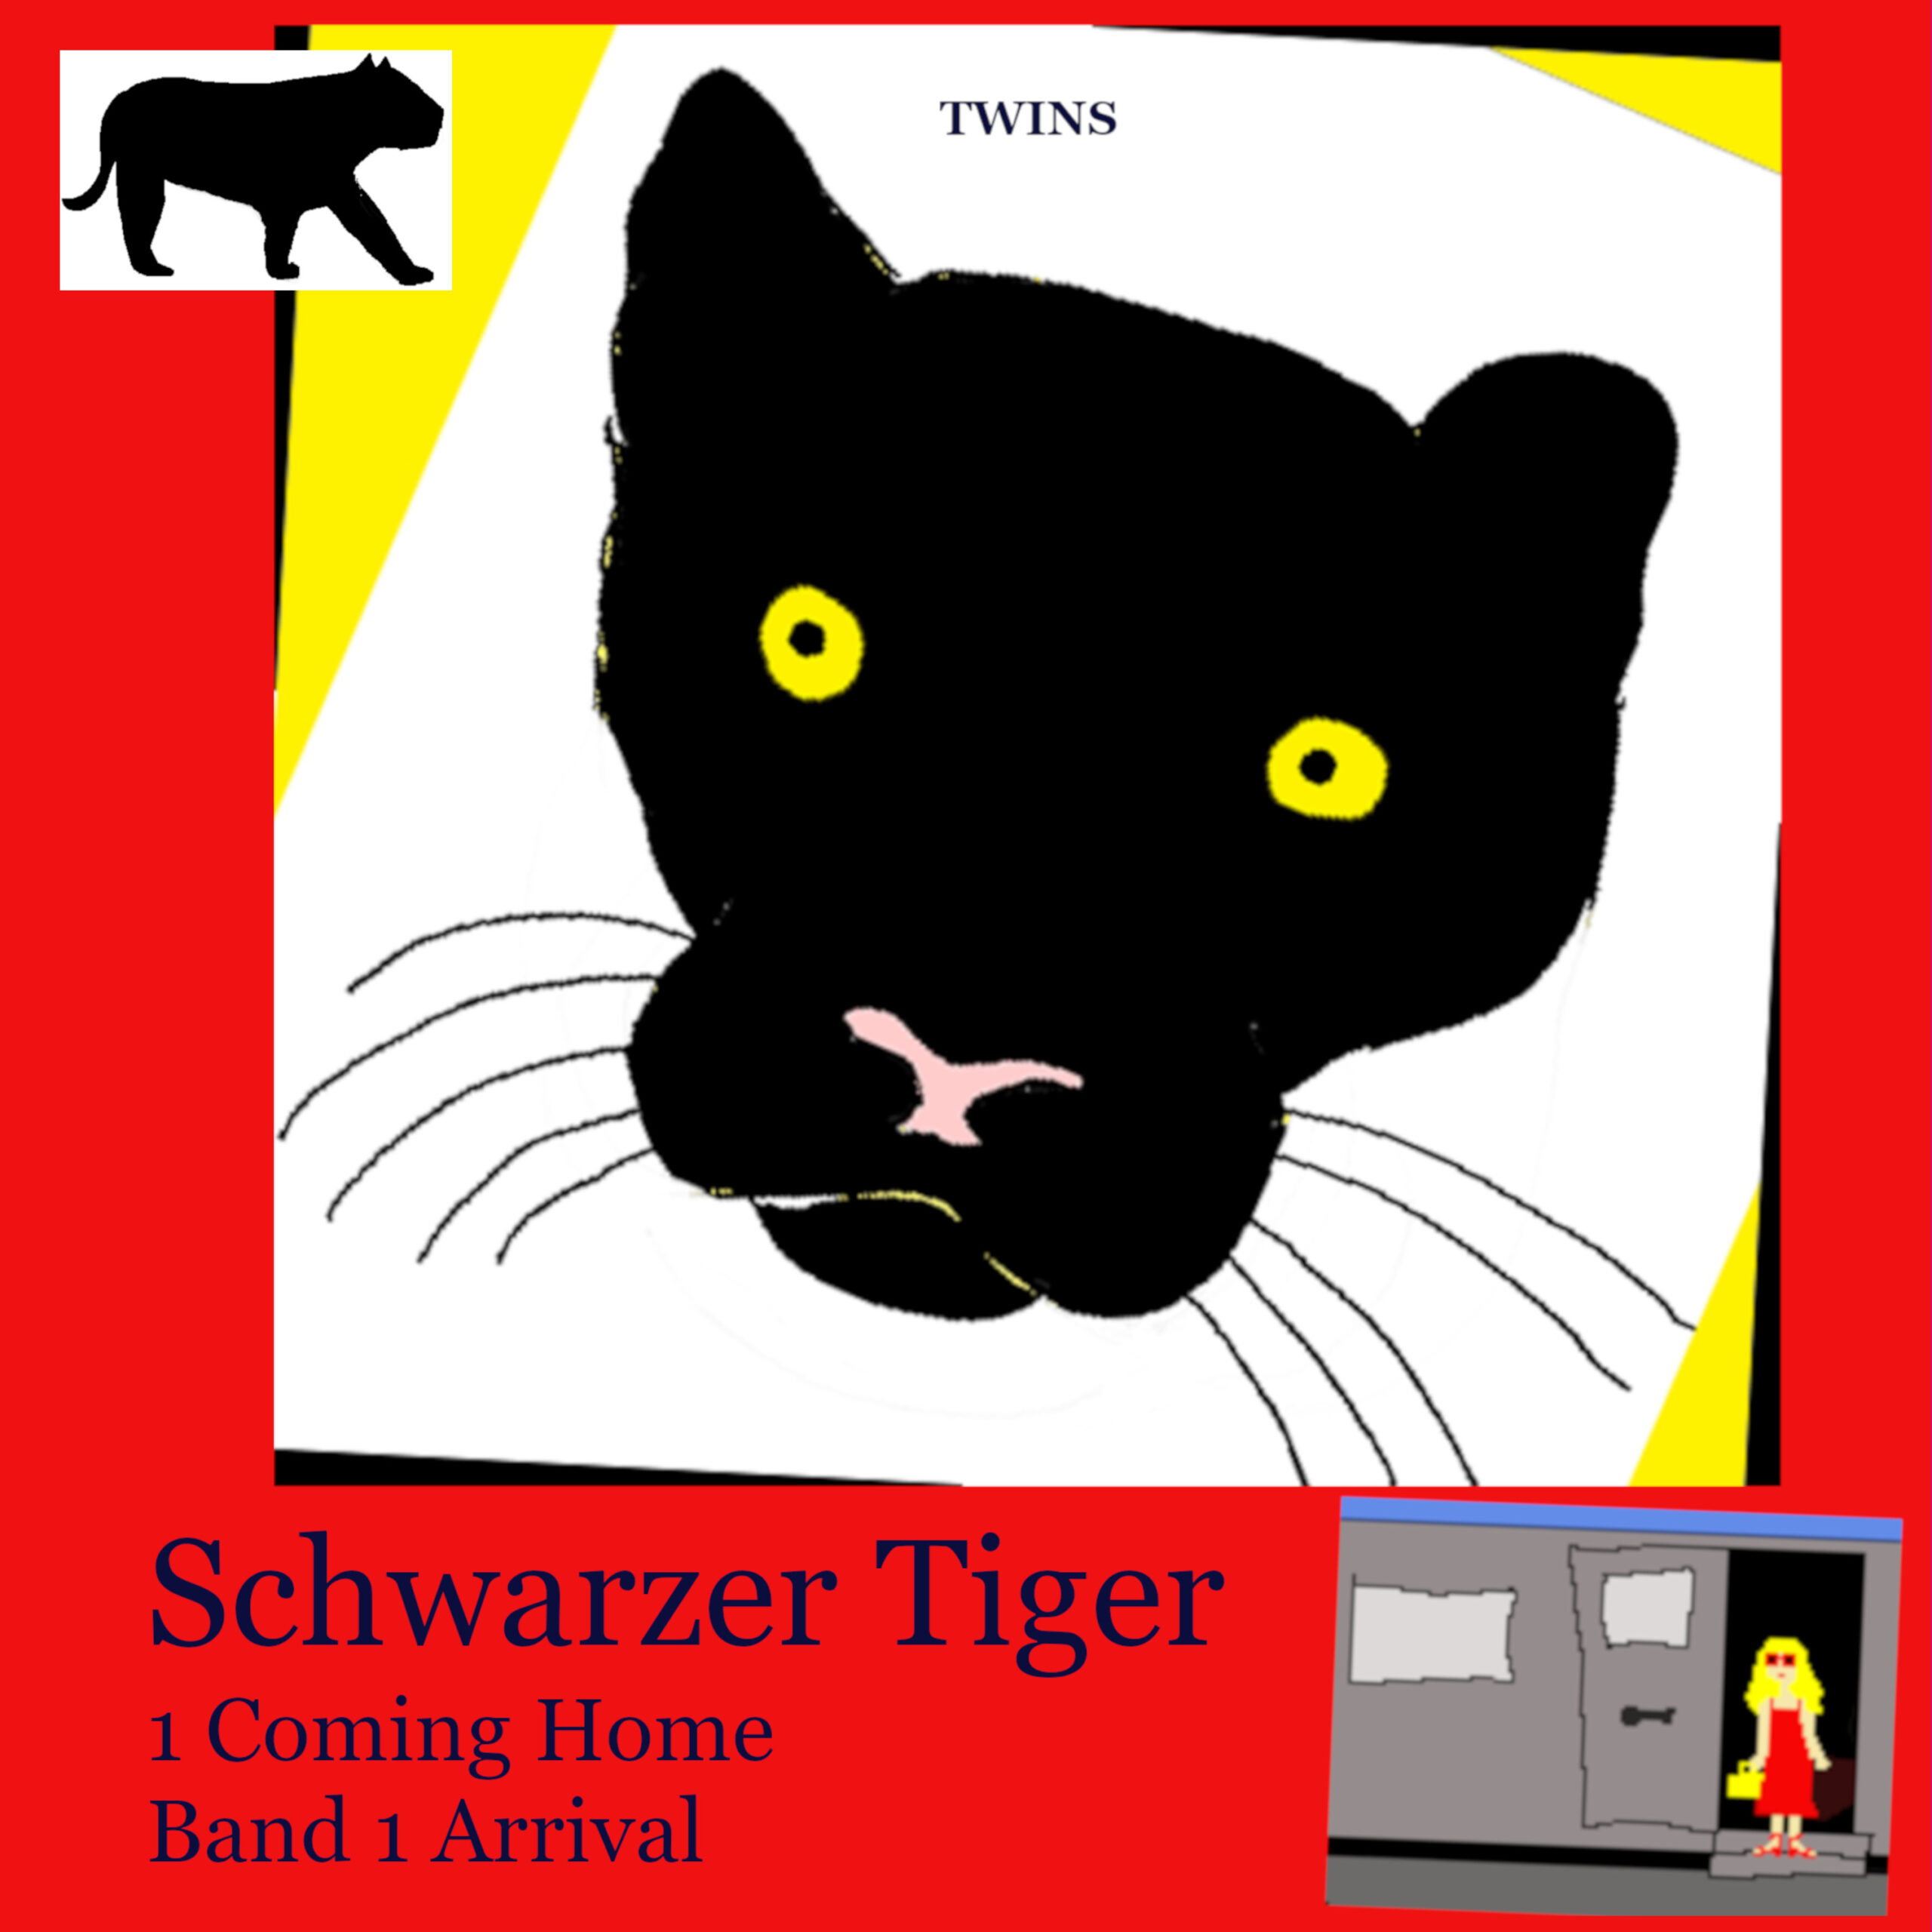 Hoerbuch Schwarzer Tiger Buch 1 Coming Home: Band 1 Arrival von TWINS